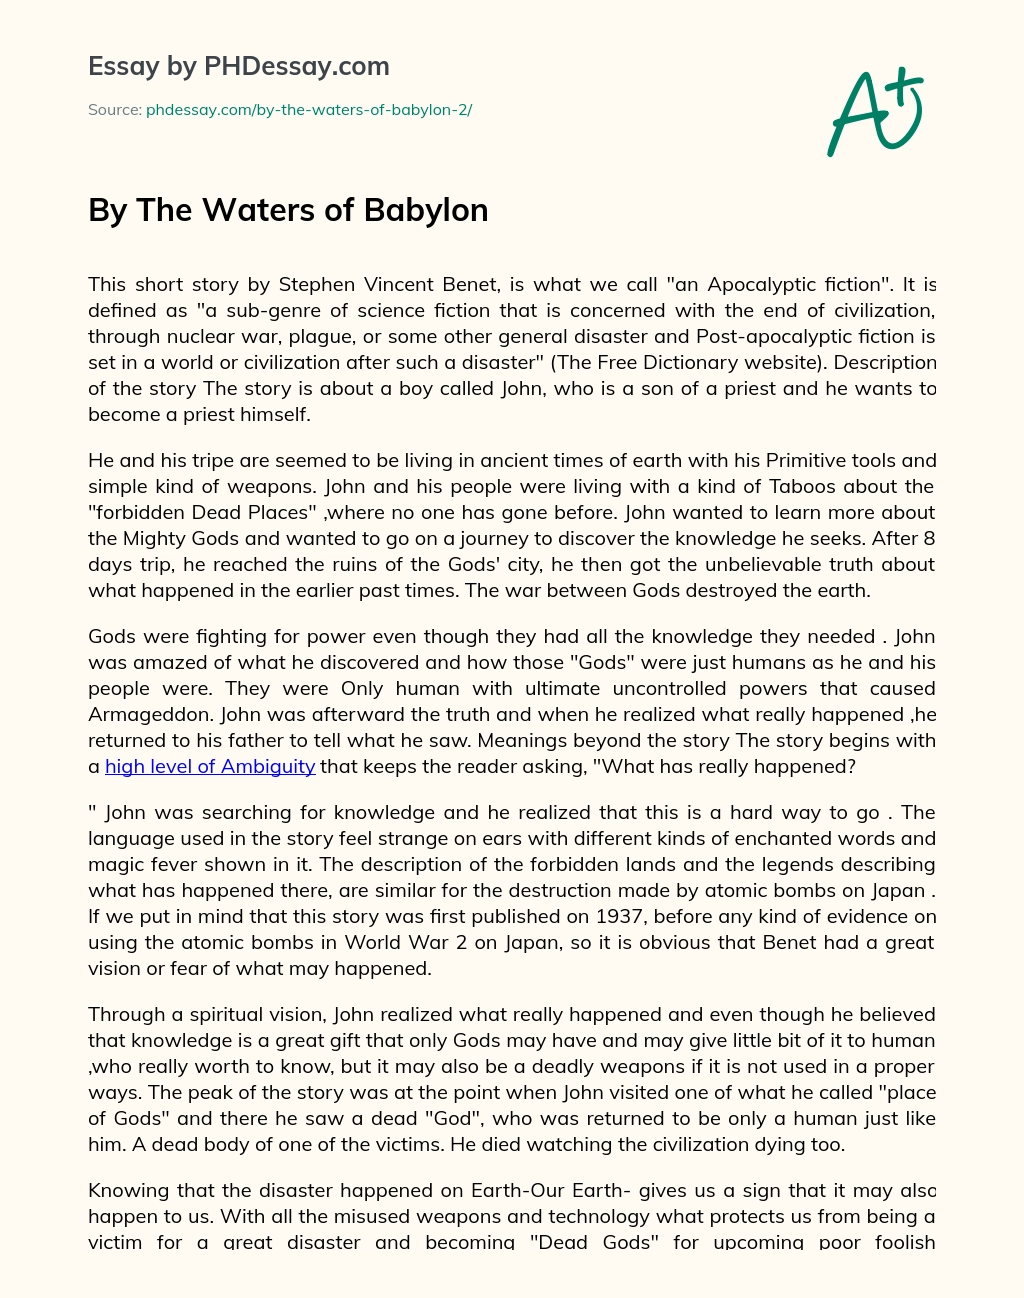 By The Waters of Babylon essay